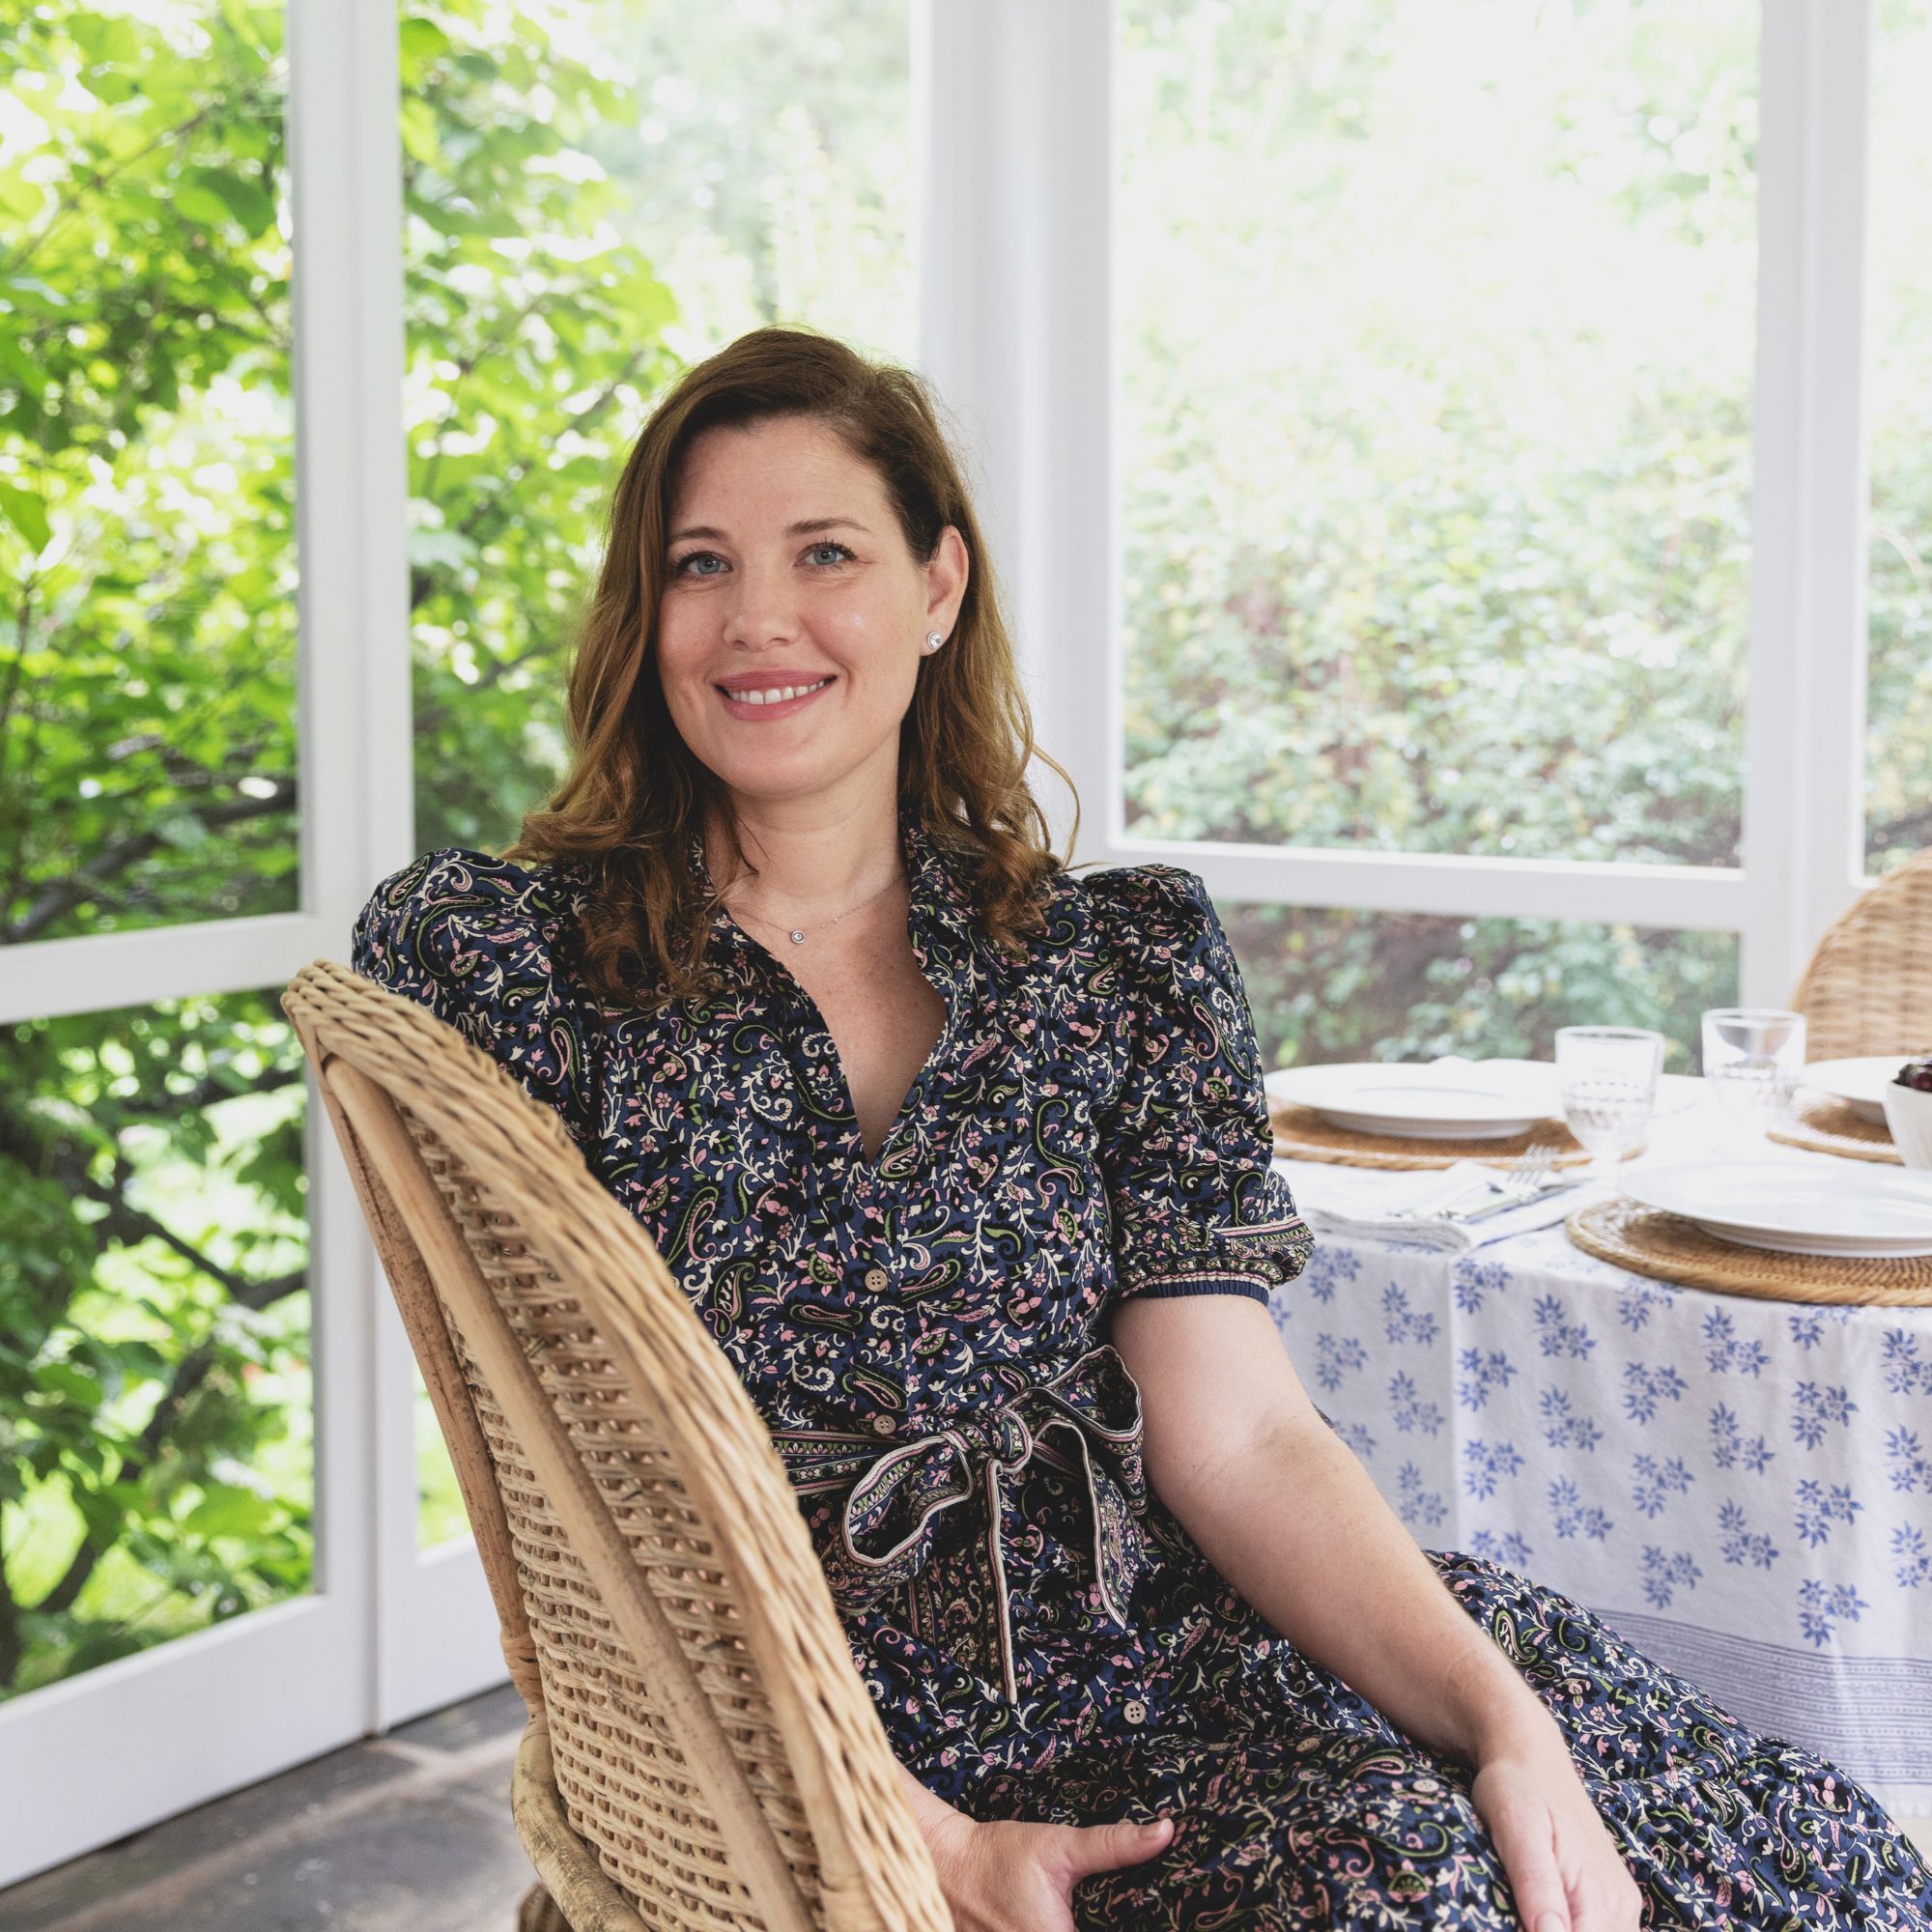 A picture of Jennifer Muirhead, a woman wearing a black dress sitting on a rattan chair in a conservatory